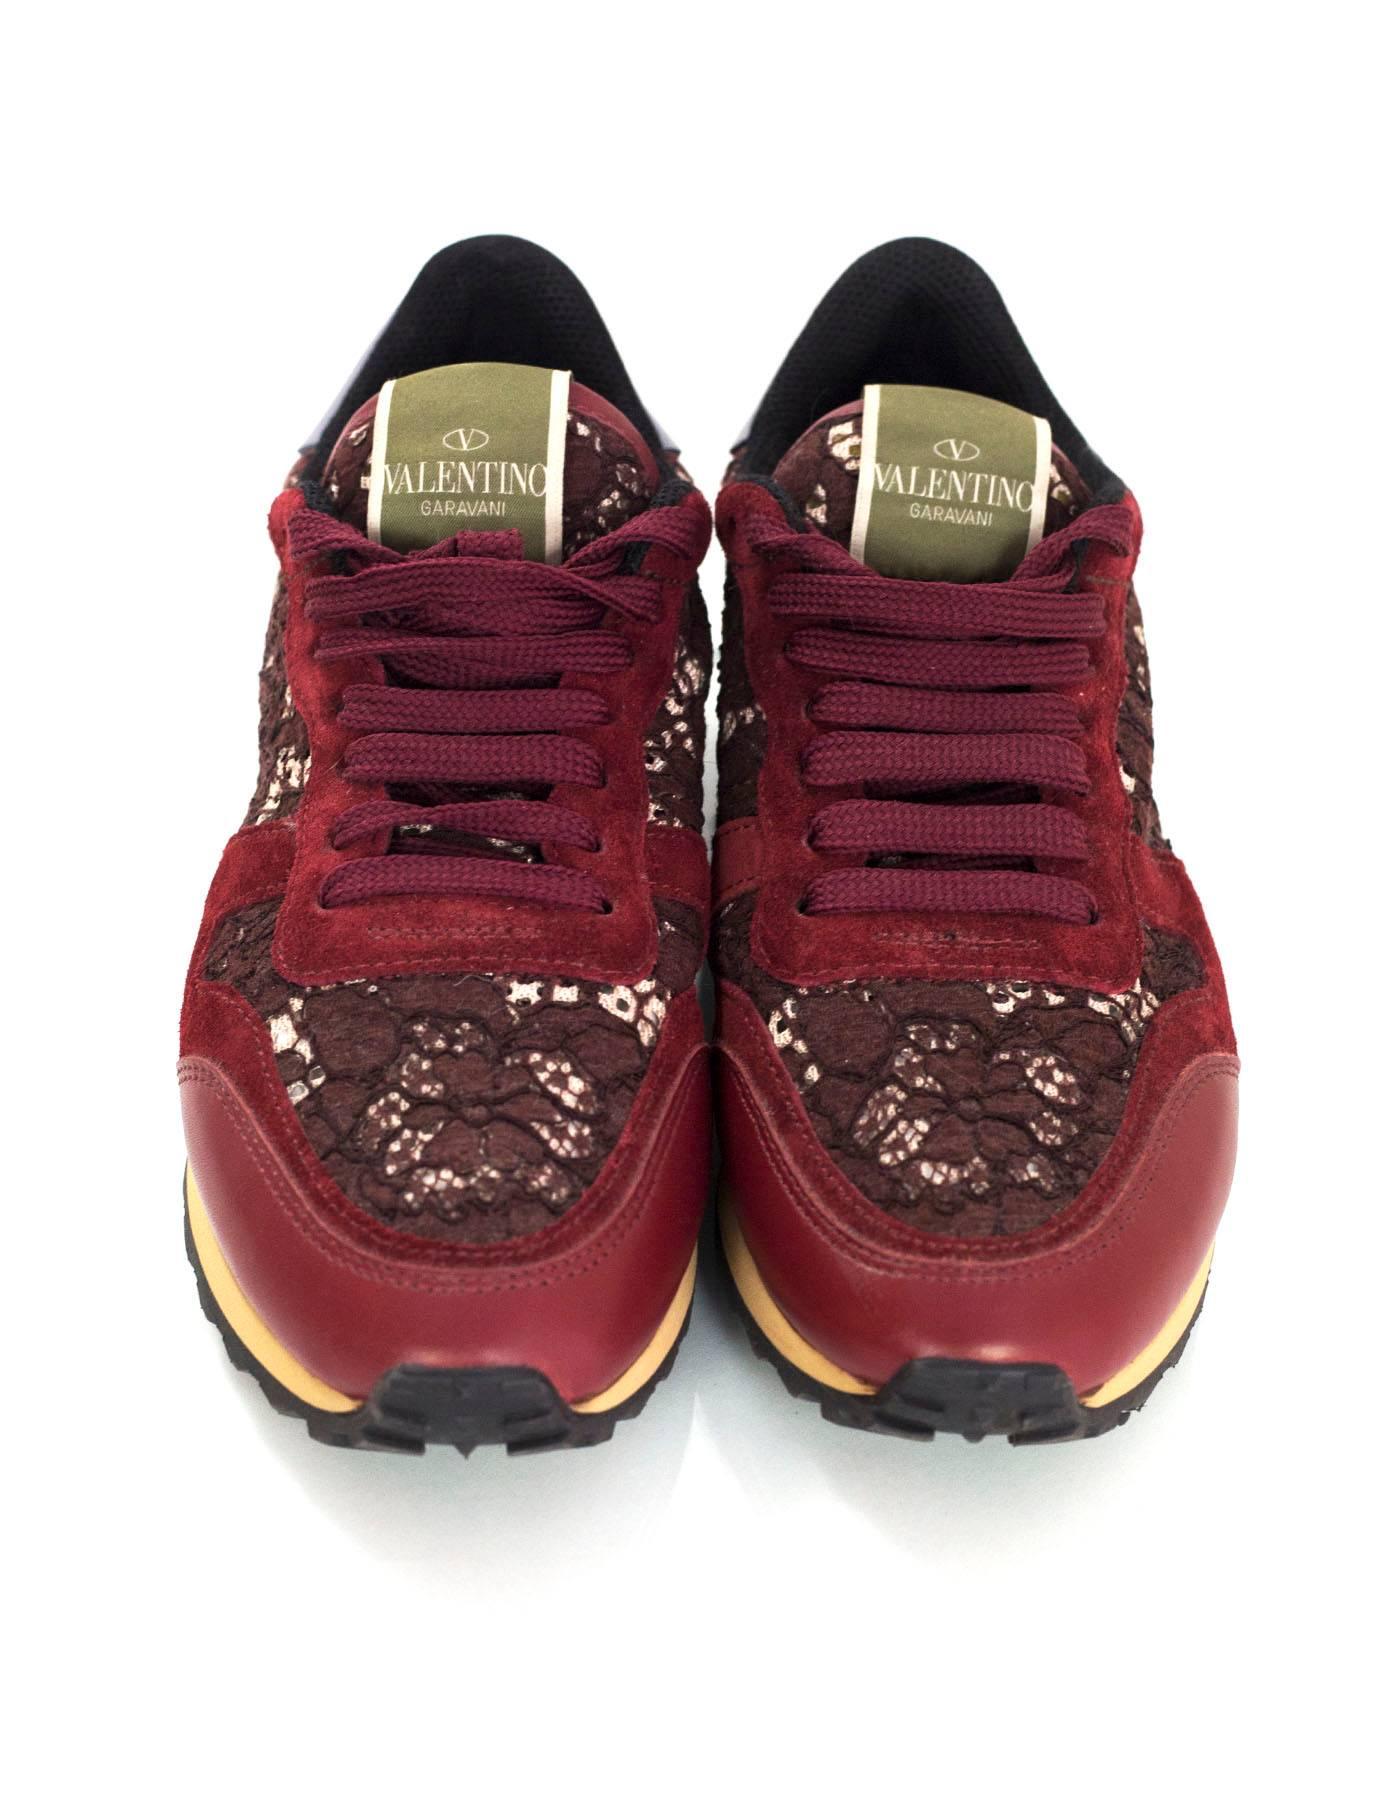 Women's Valentino Burgundy Suede & Lace Rockrunner Sneakers Sz 38.5